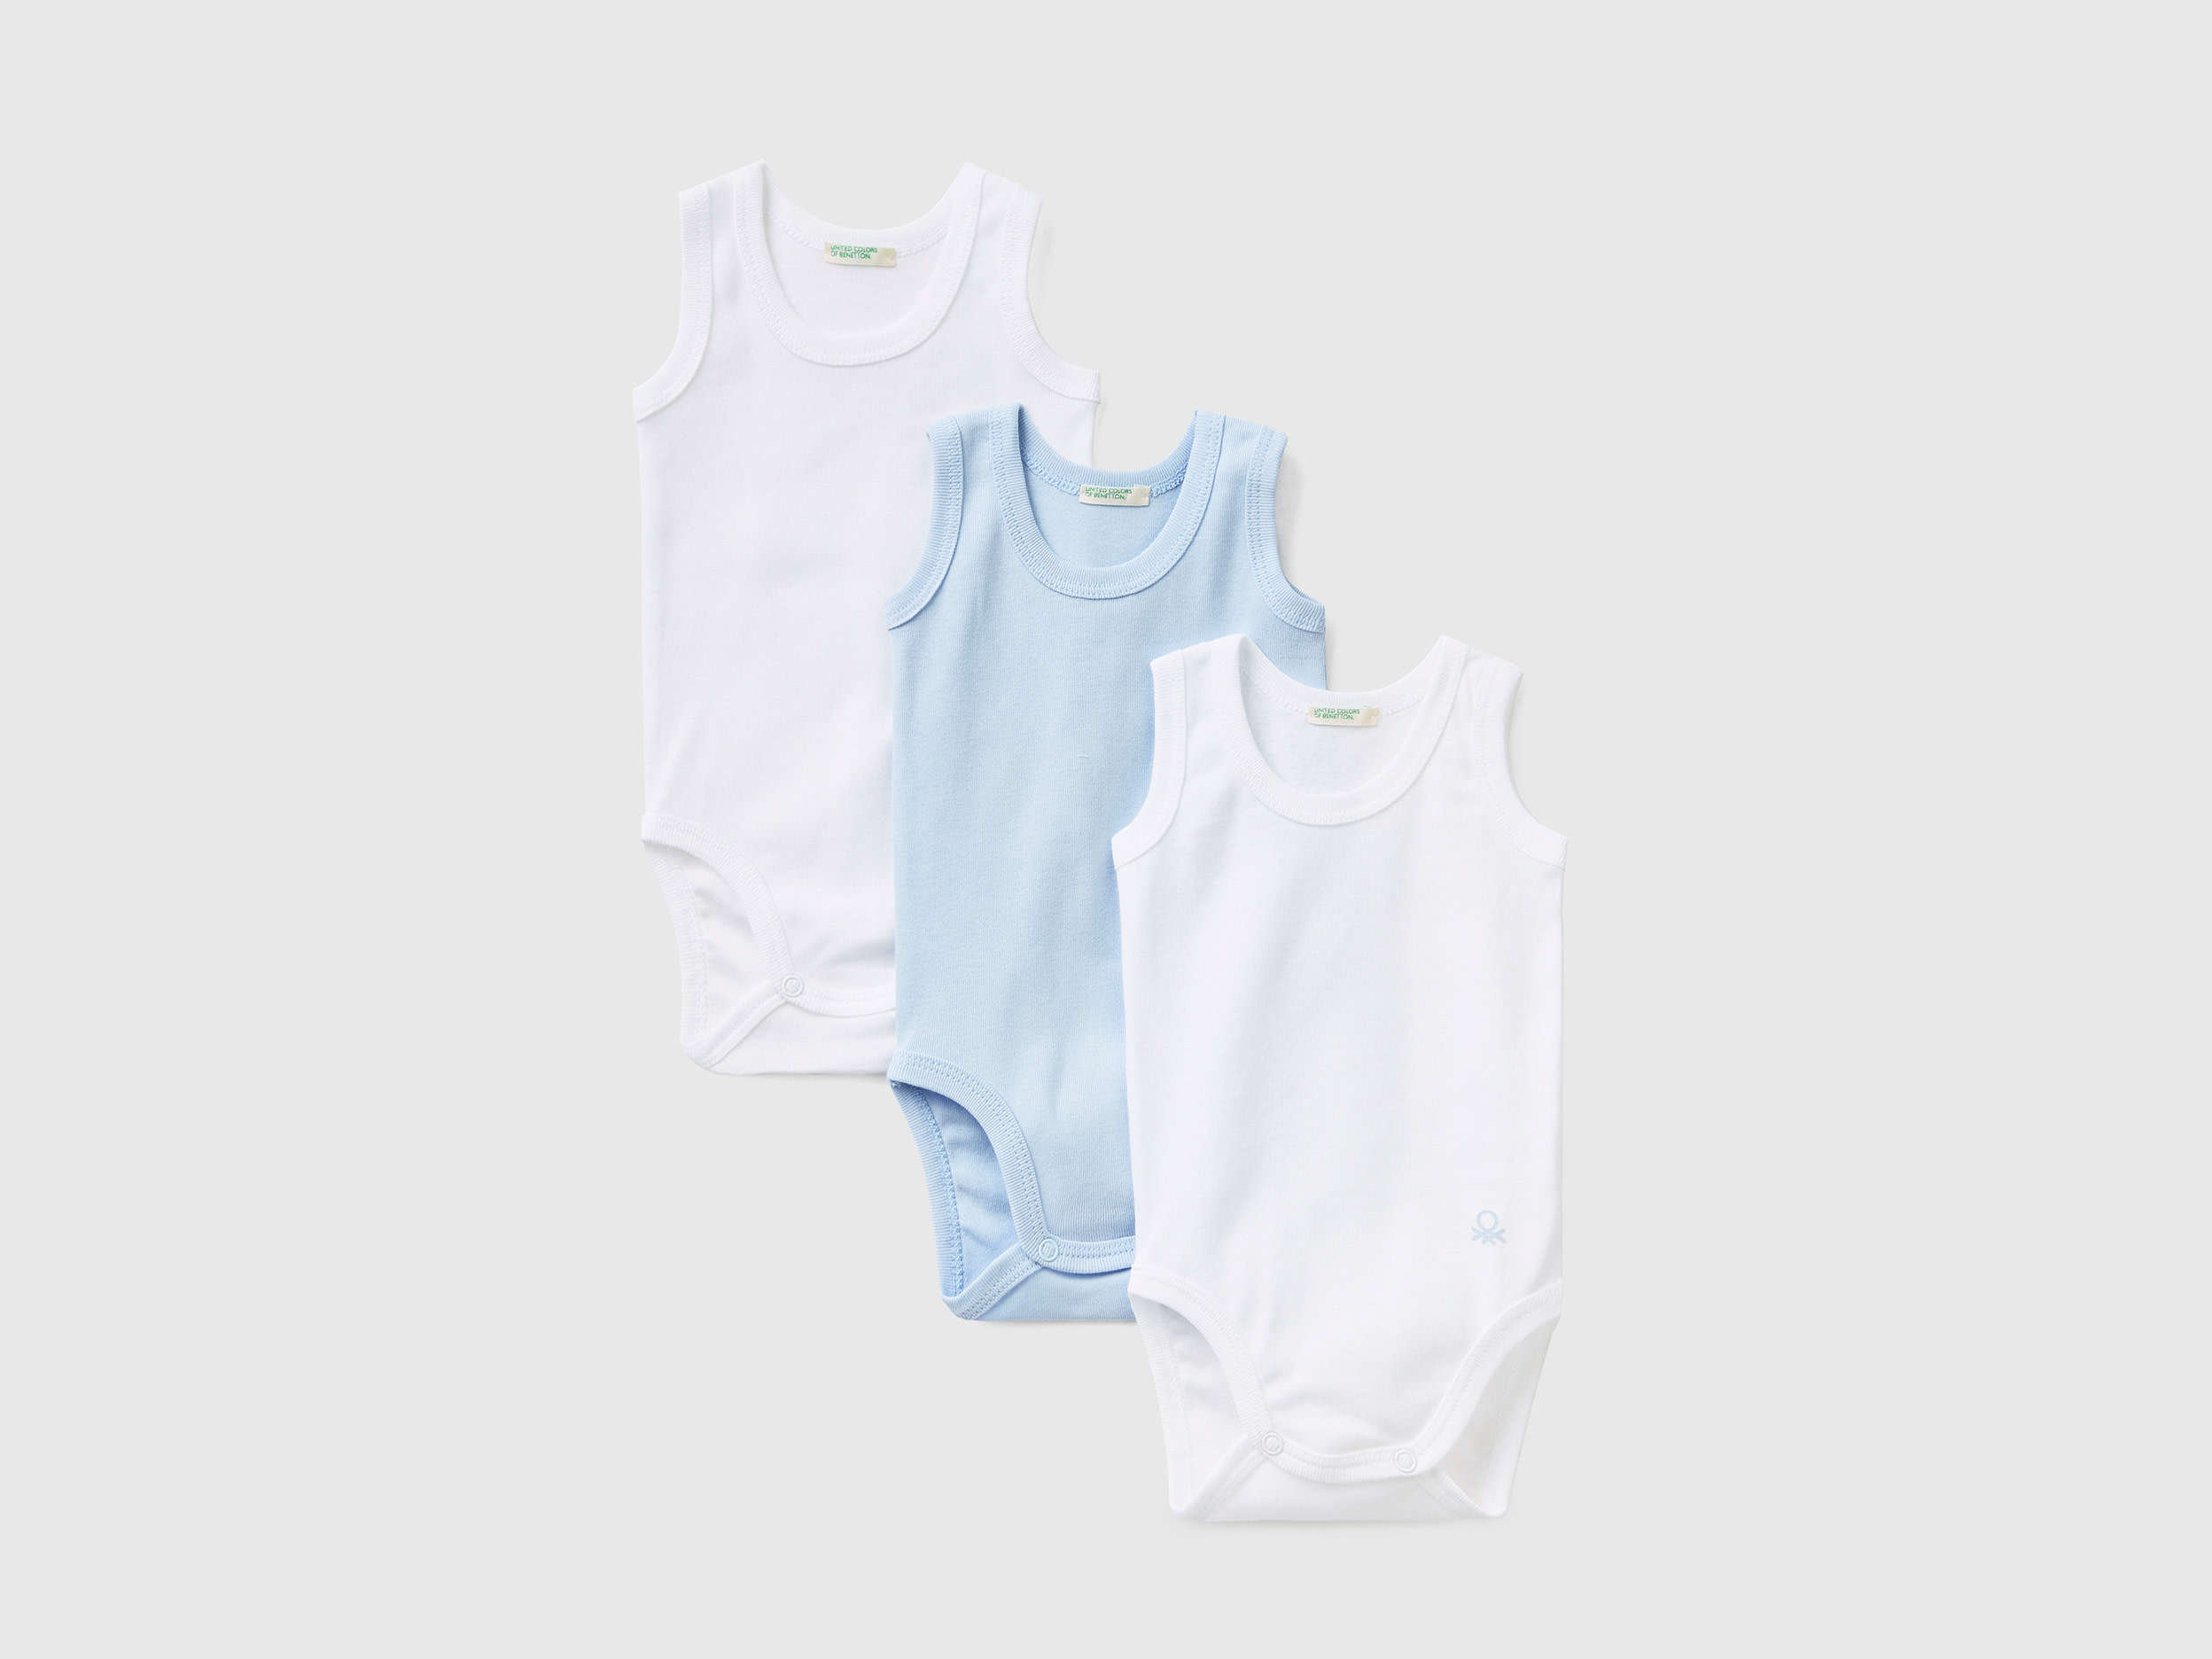 Benetton, Three Solid Color Tank Top Bodysuits, size 1-3, Light Blue, Kids